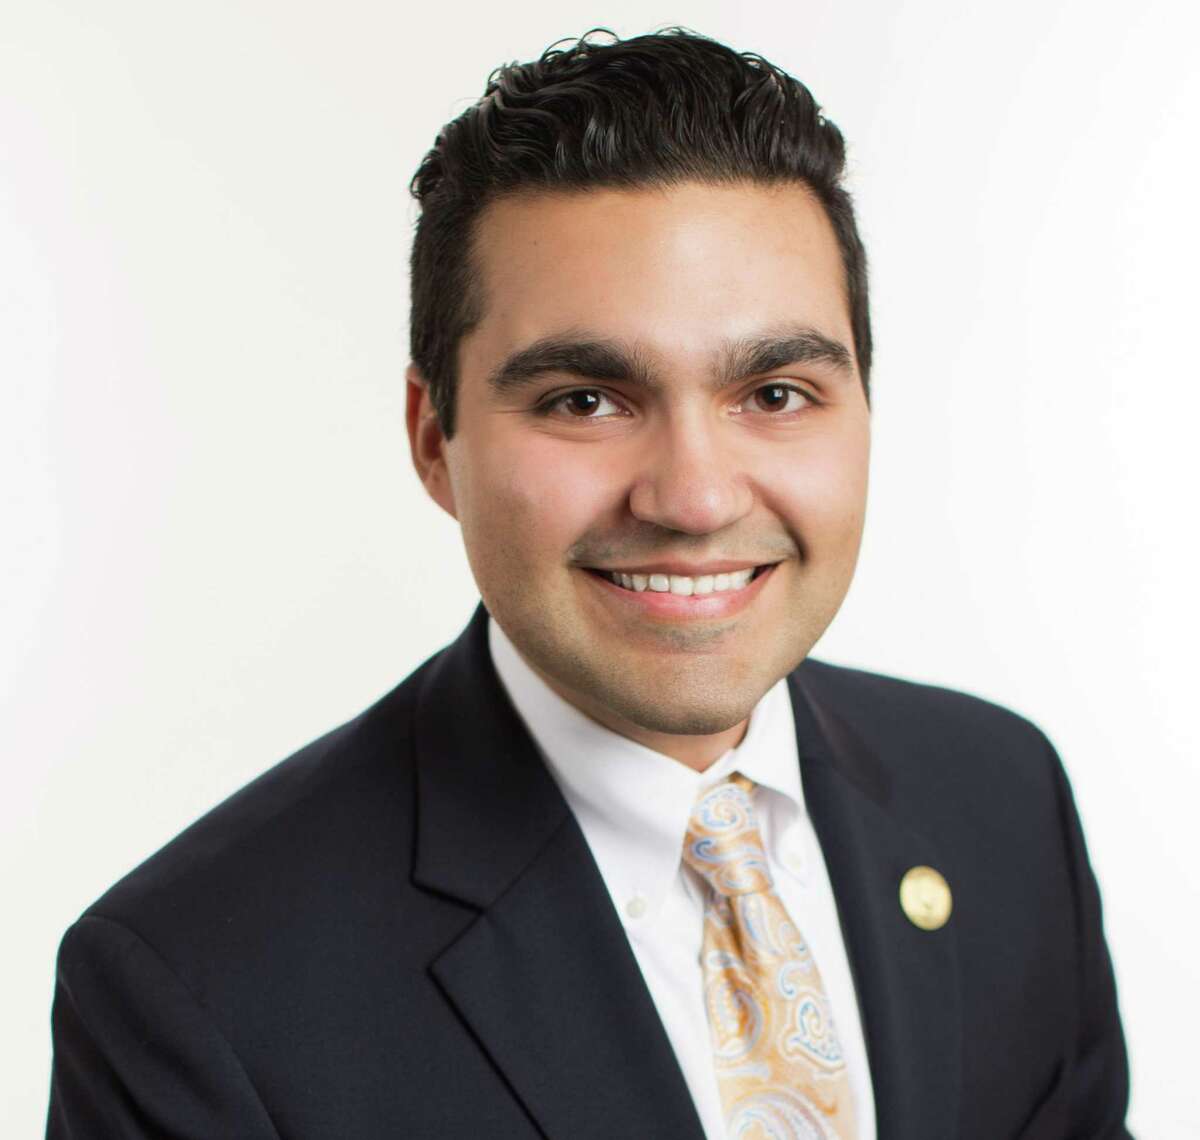 Nick Kapoor, a Democrat, is running for the 112th House seat, which represents Monroe and a portion of Newtown.